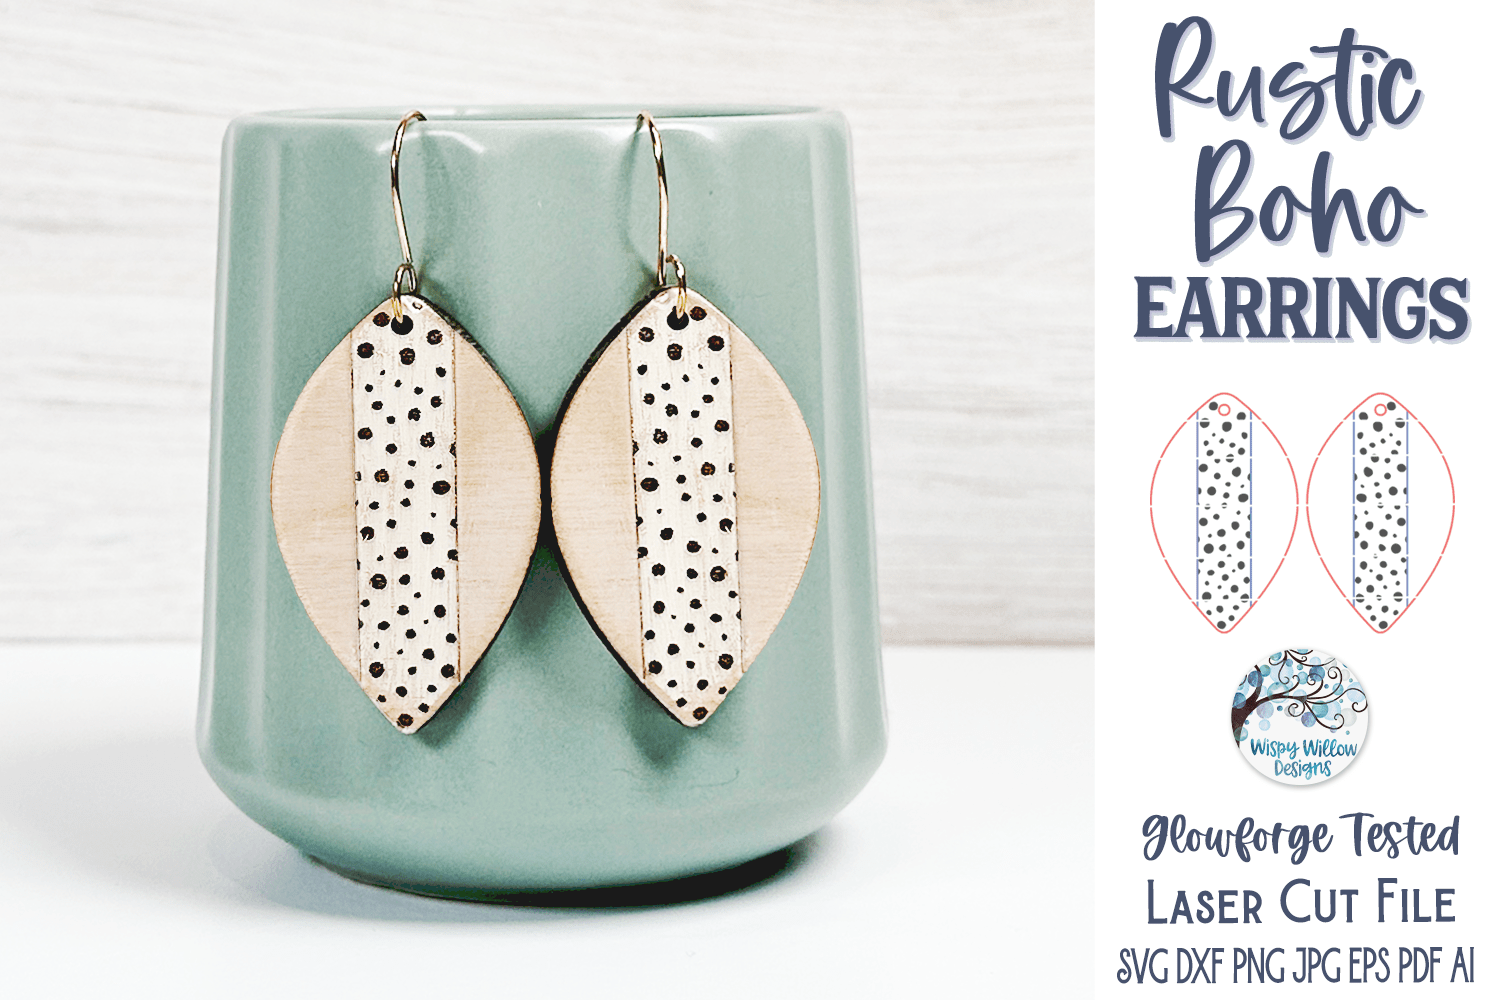 Rustic Boho Earring File for Glowforge or Laser Wispy Willow Designs Company